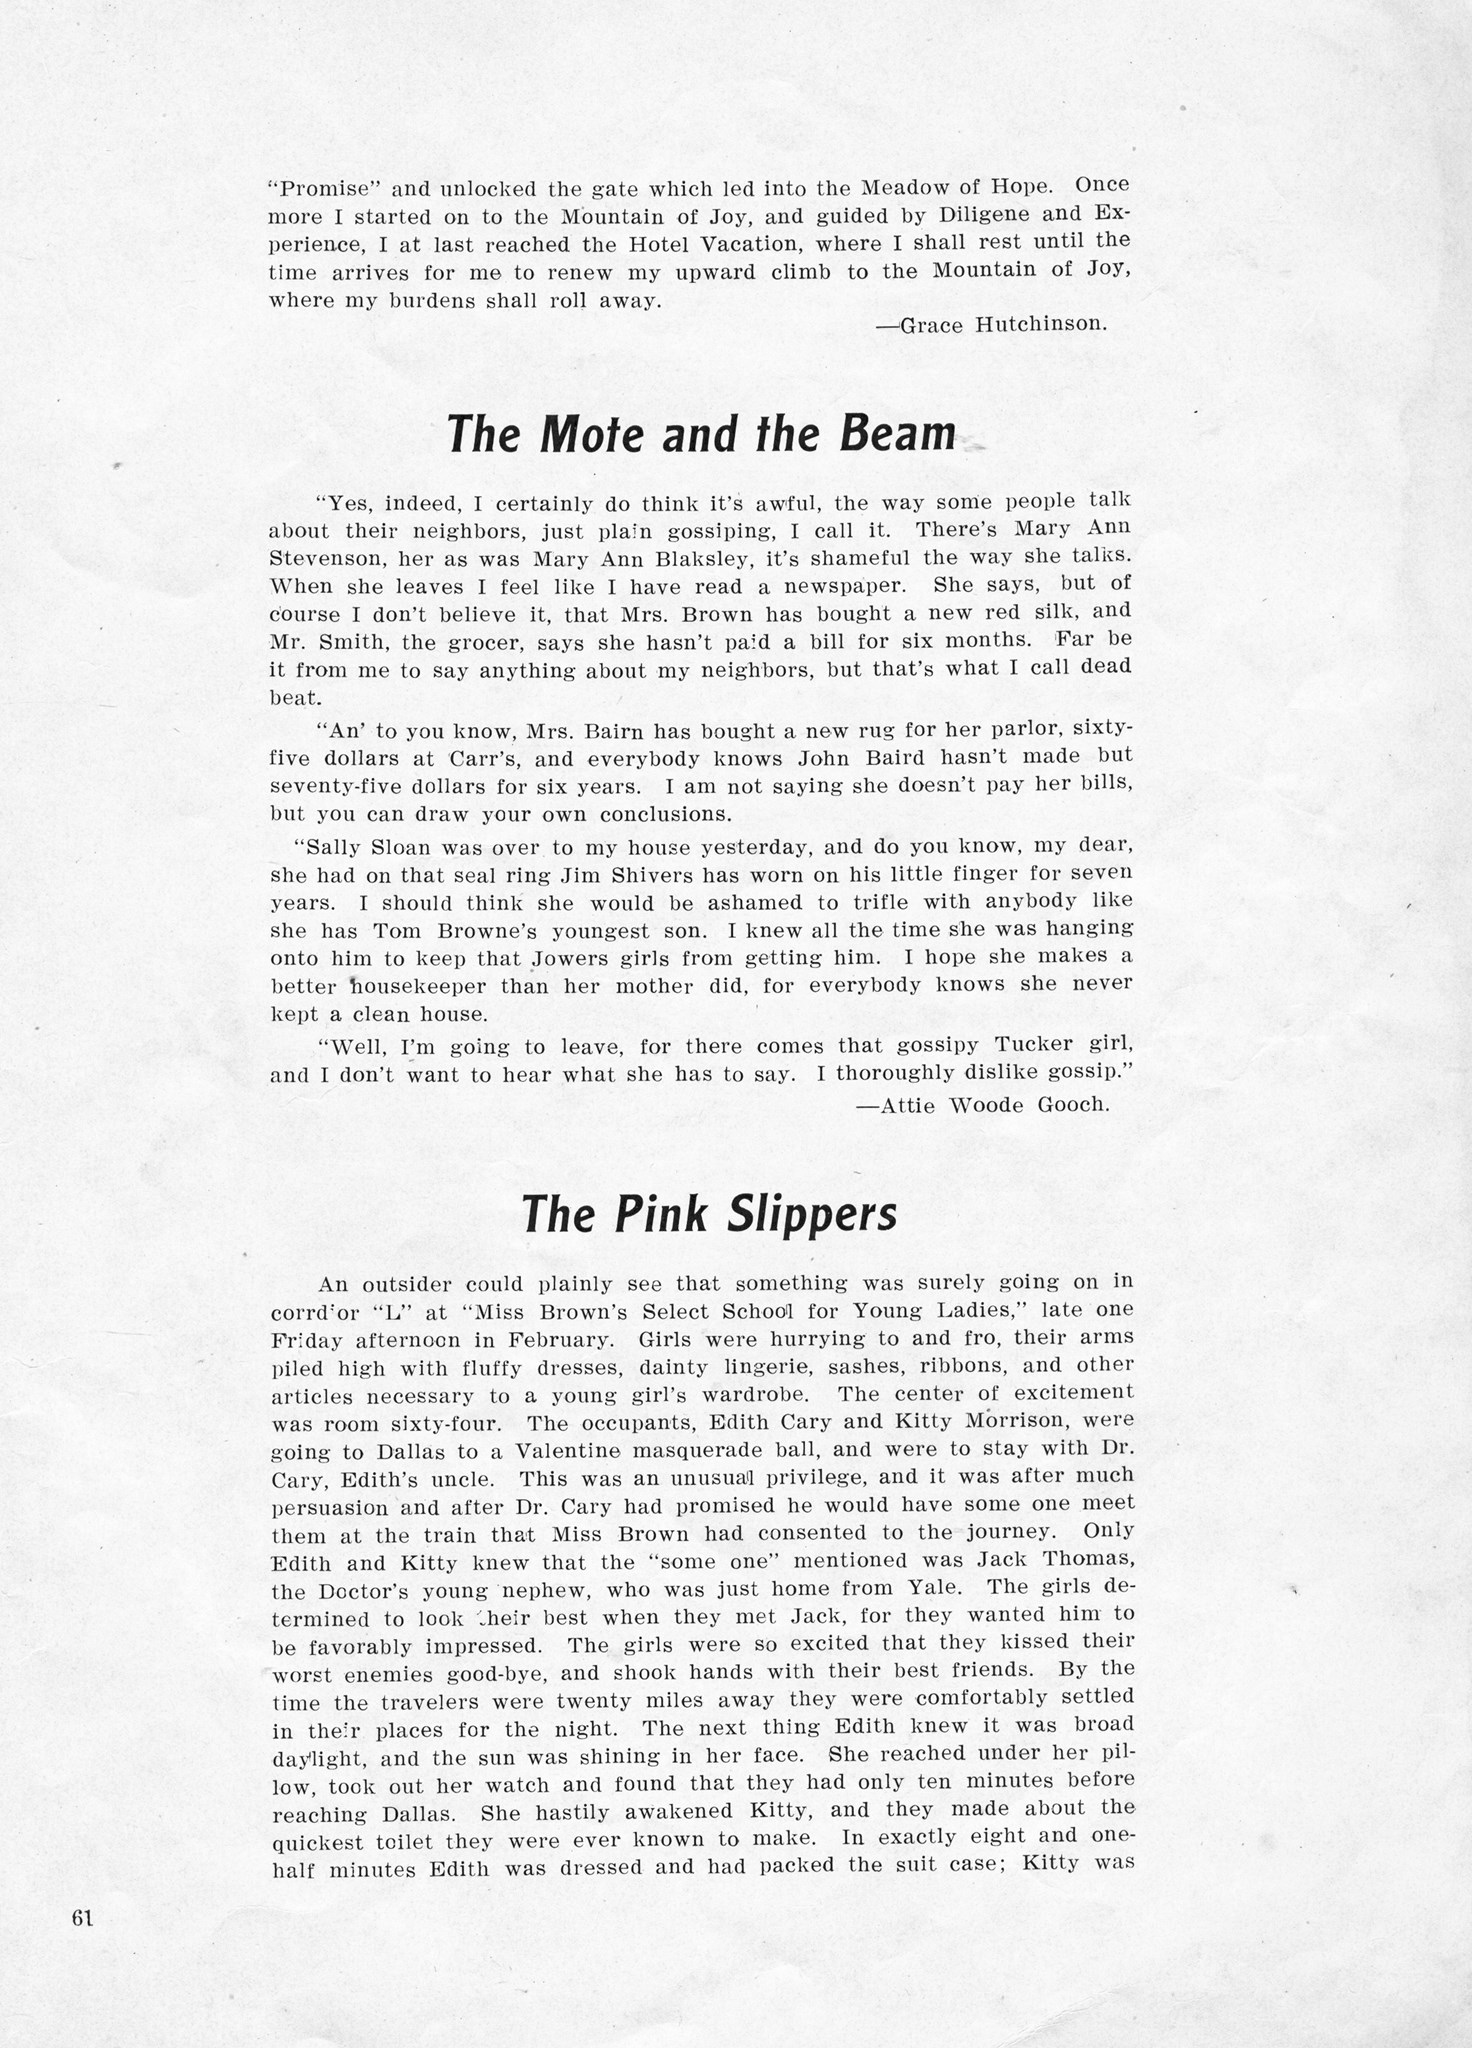 ../../../Images/Large/1911/Arclight-1911-pg0061.jpg